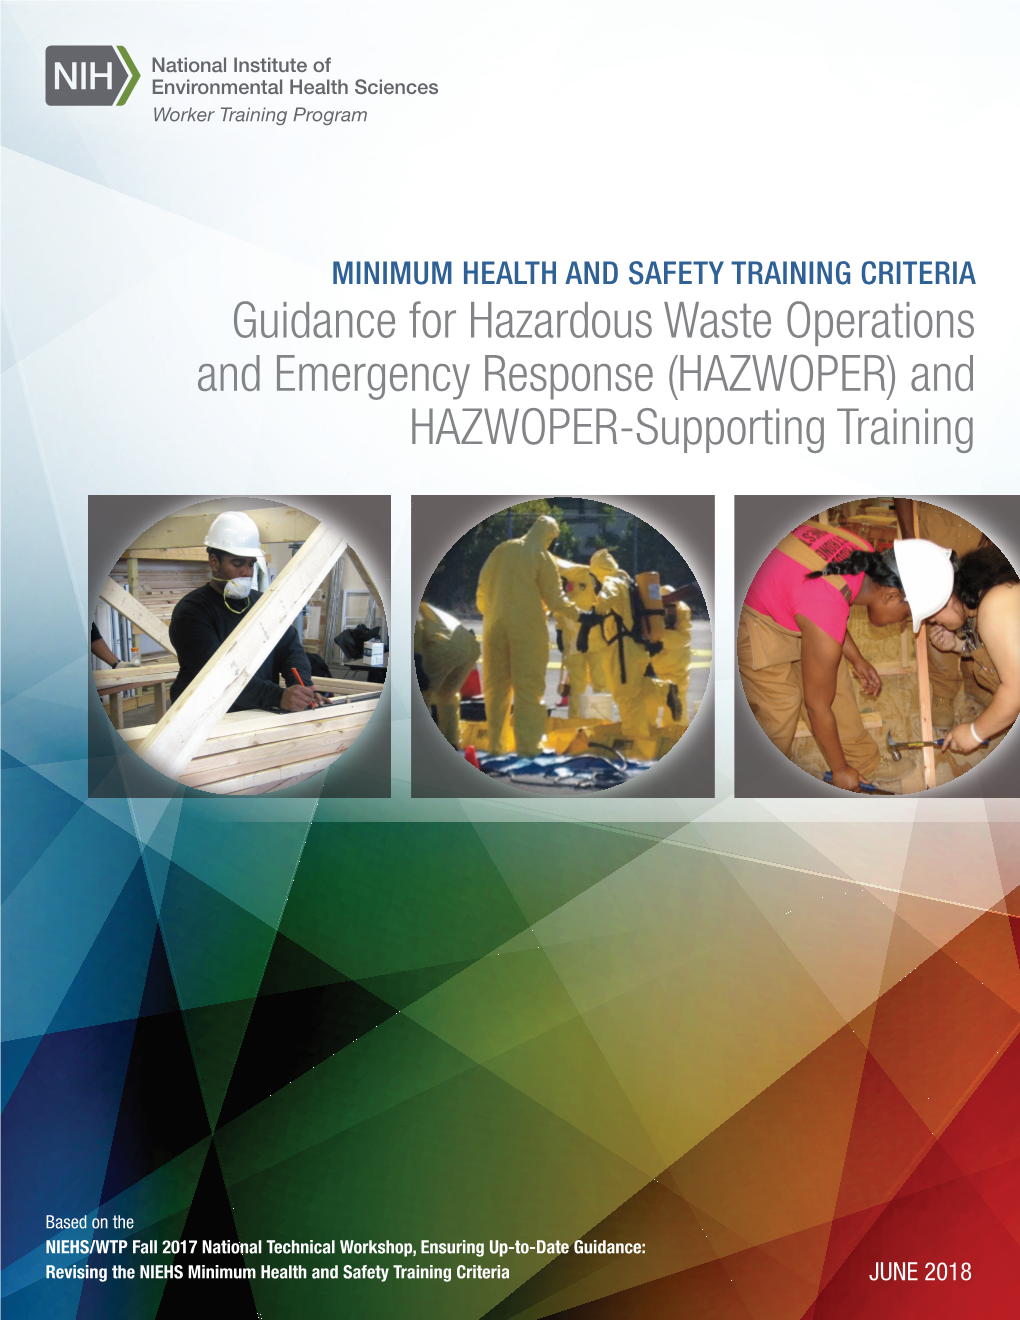 MINIMUM HEALTH and SAFETY TRAINING CRITERIA Guidance for Hazardous Waste Operations and Emergency Response (HAZWOPER) and HAZWOPER-Supporting Training